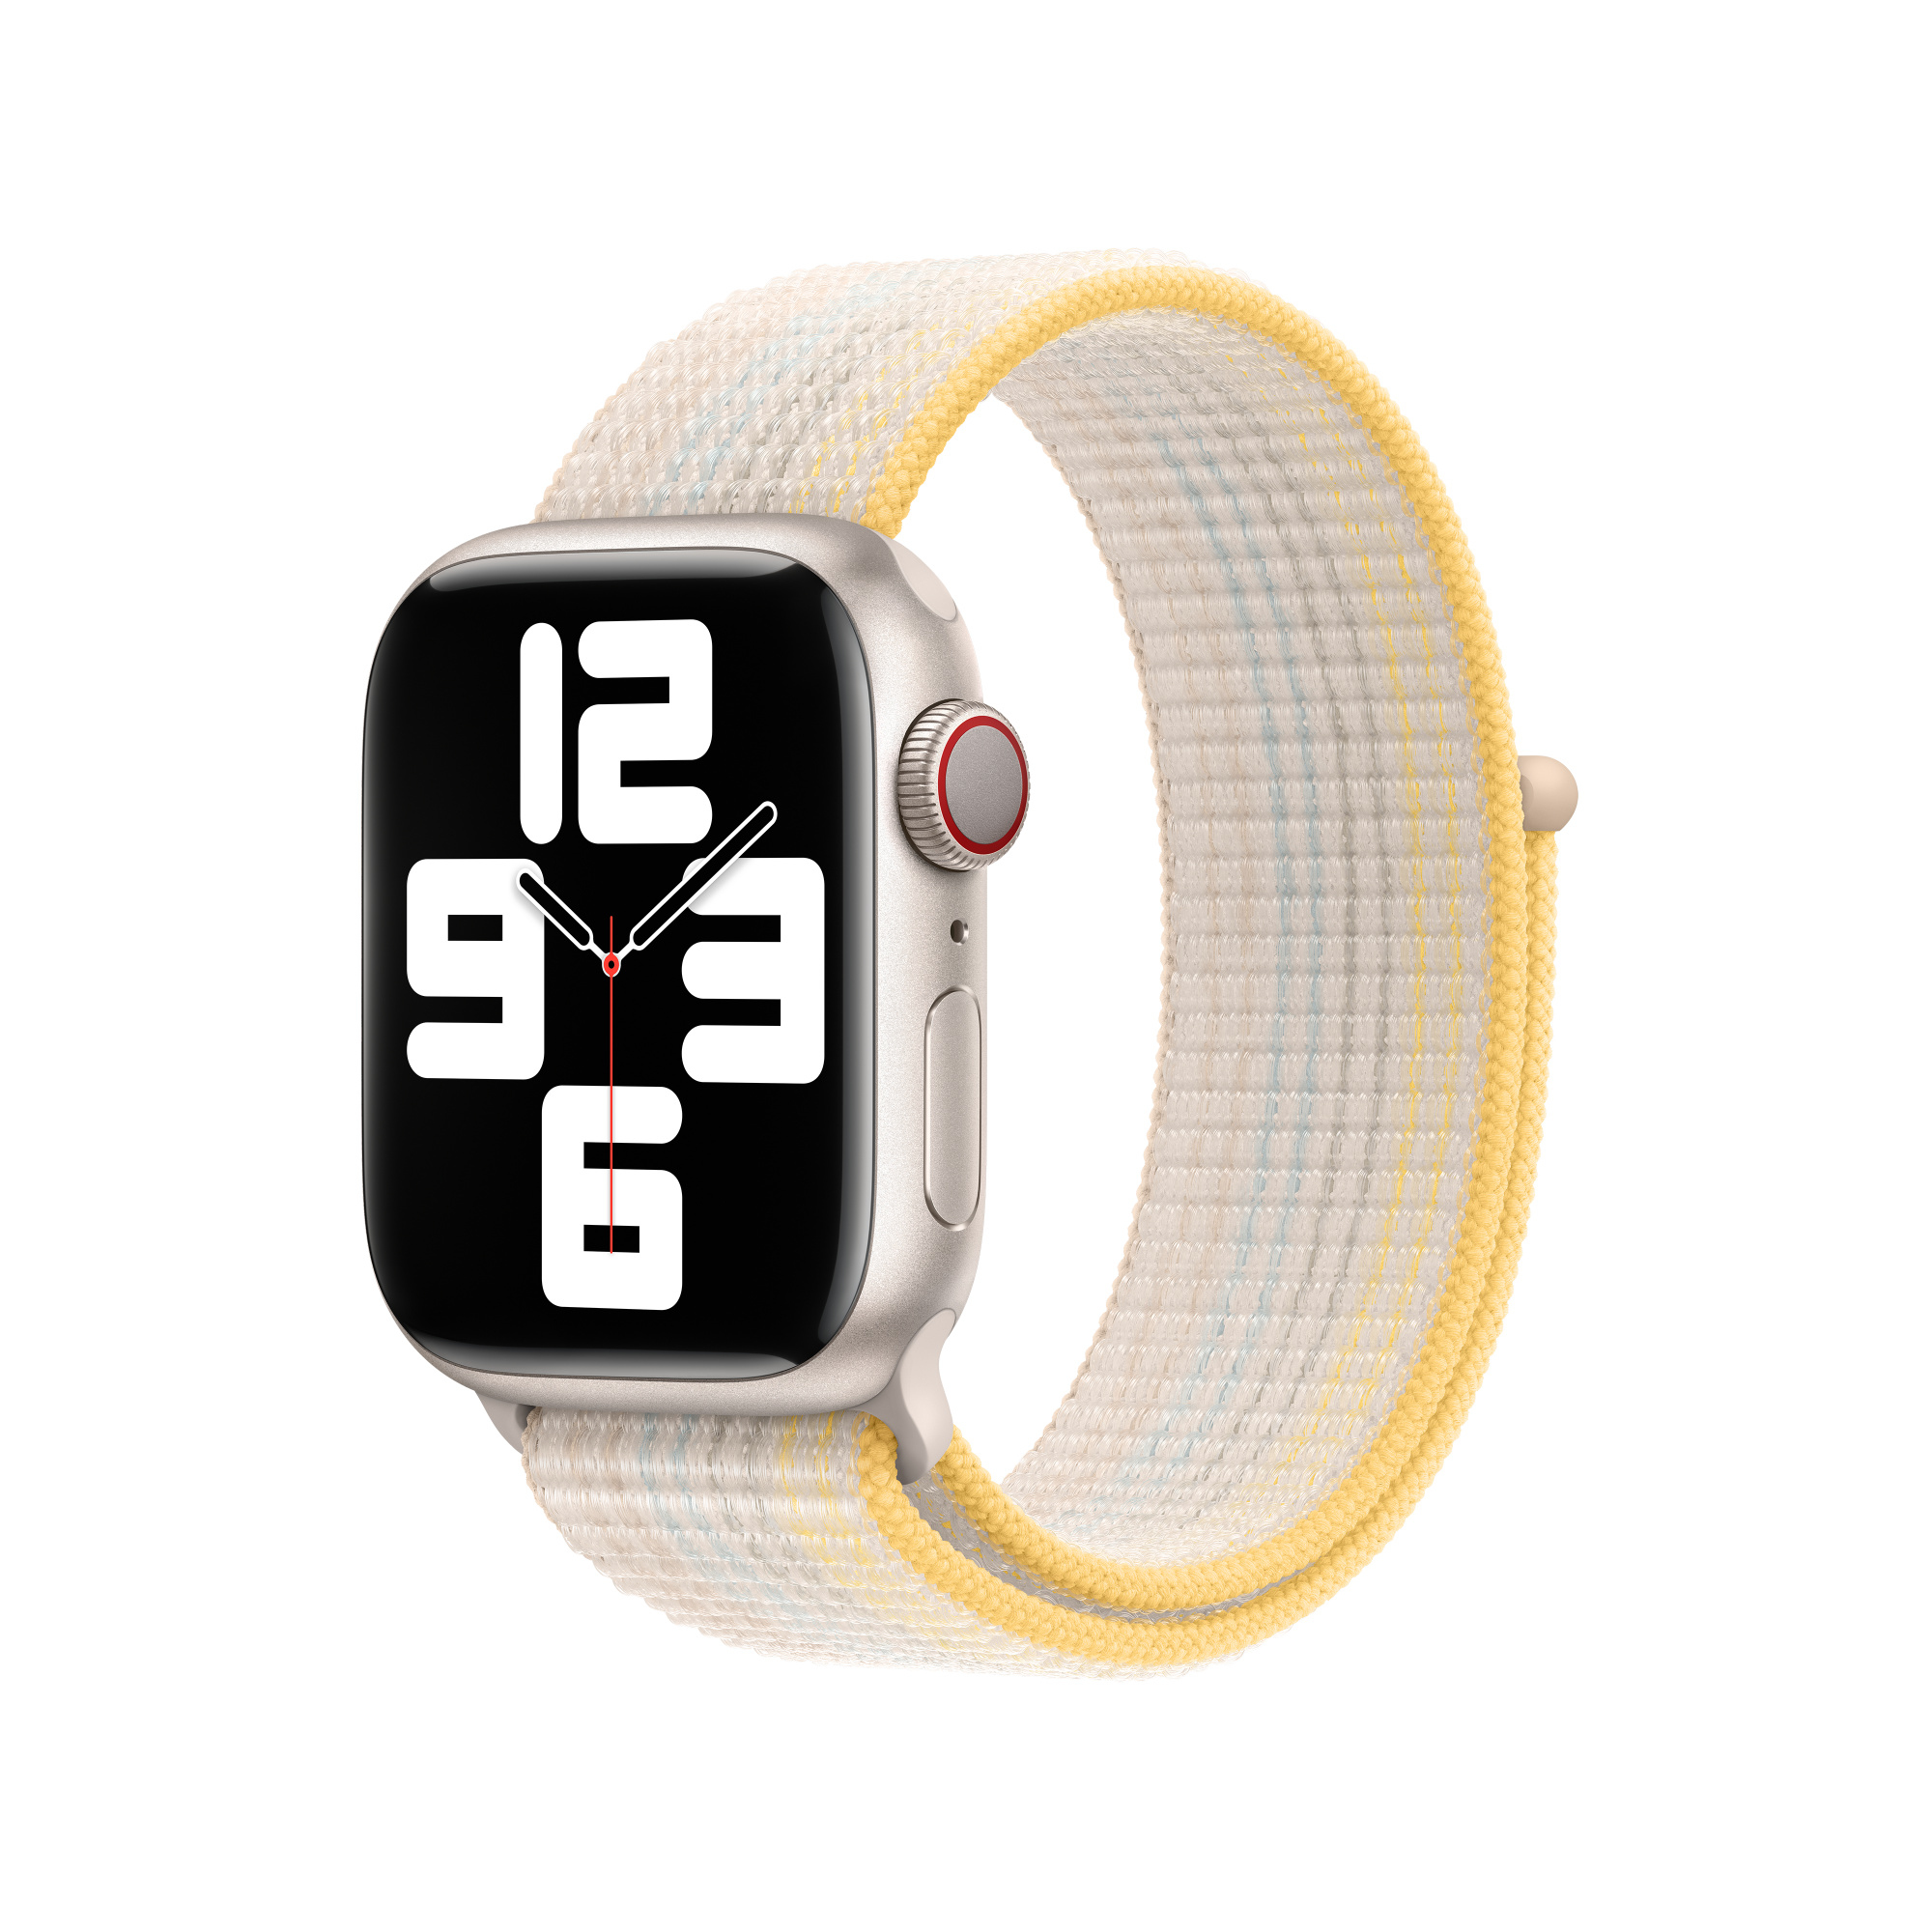 Photos - Smartwatch Band / Strap Apple MPL73ZM/A Smart Wearable Accessories Band White Nylon 